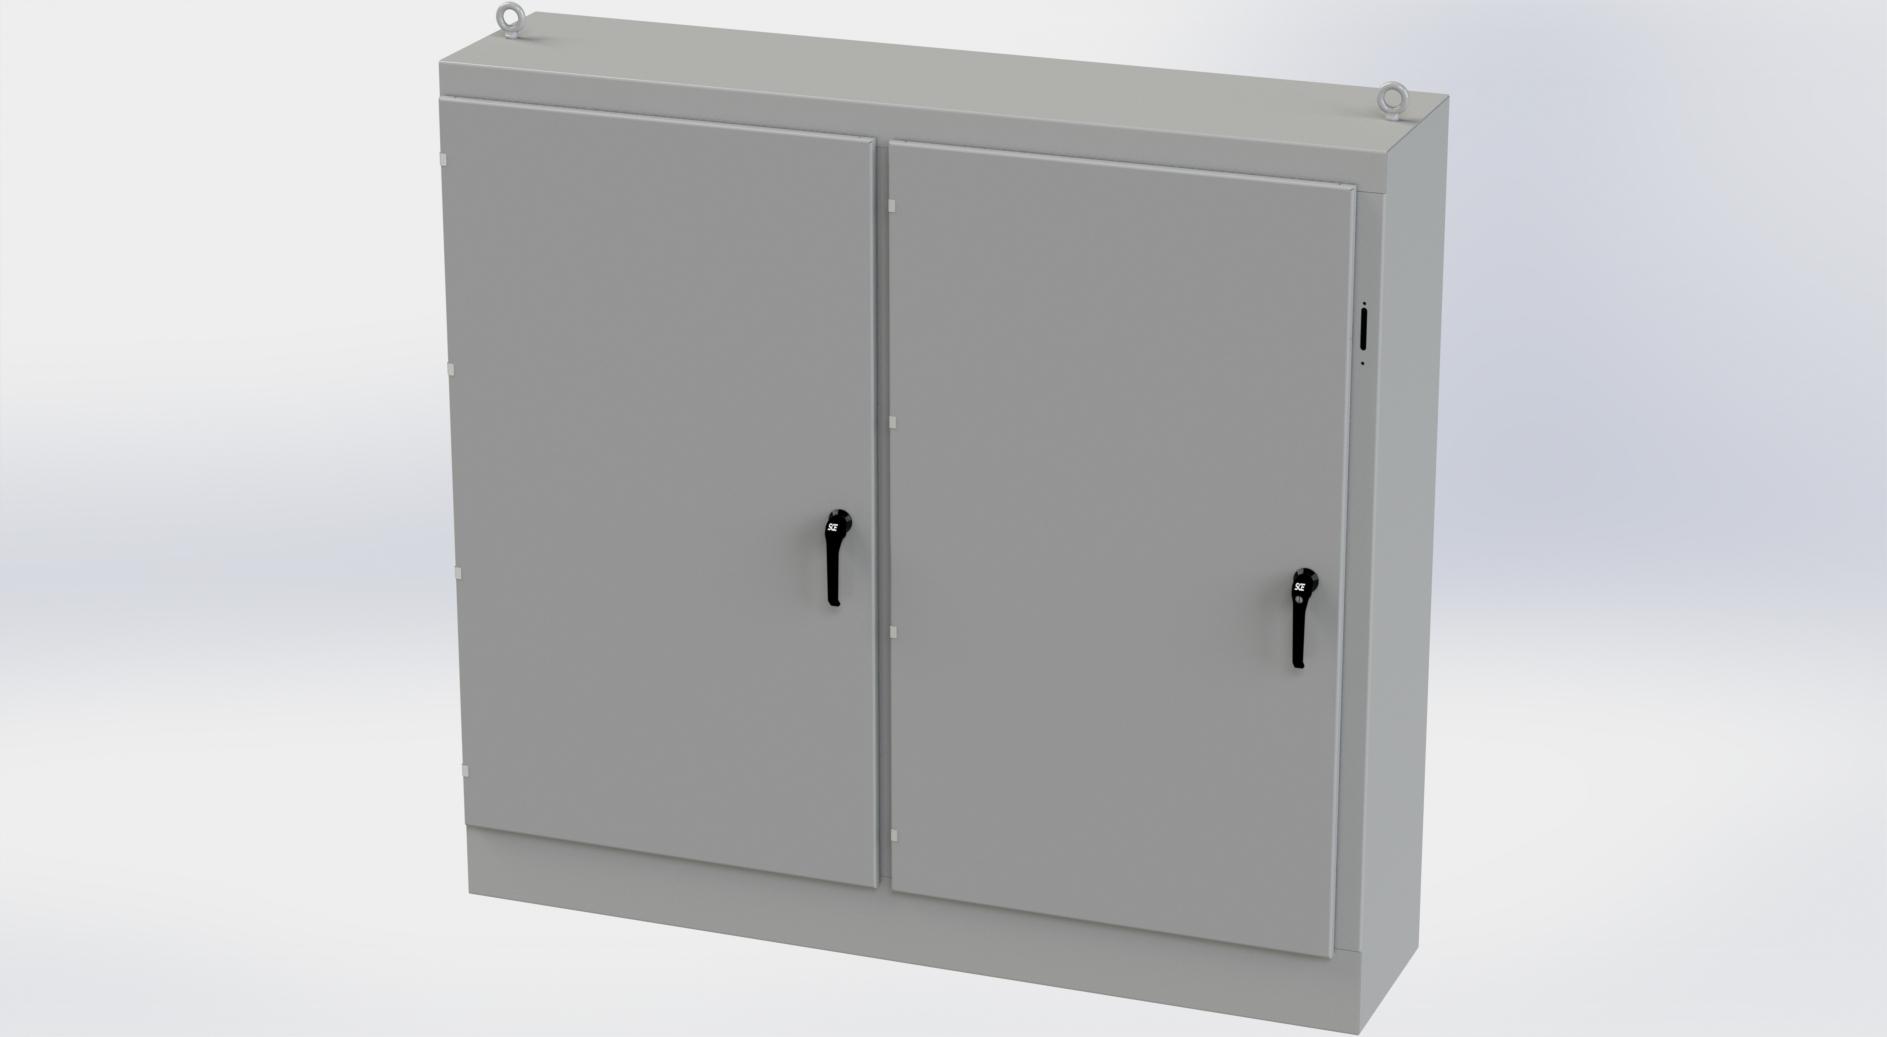 Saginaw Control SCE-72XM7818G 2DR XM Enclosure, Height:72.00", Width:77.75", Depth:18.00", ANSI-61 gray powder coating inside and out. Sub-panels are powder coated white.